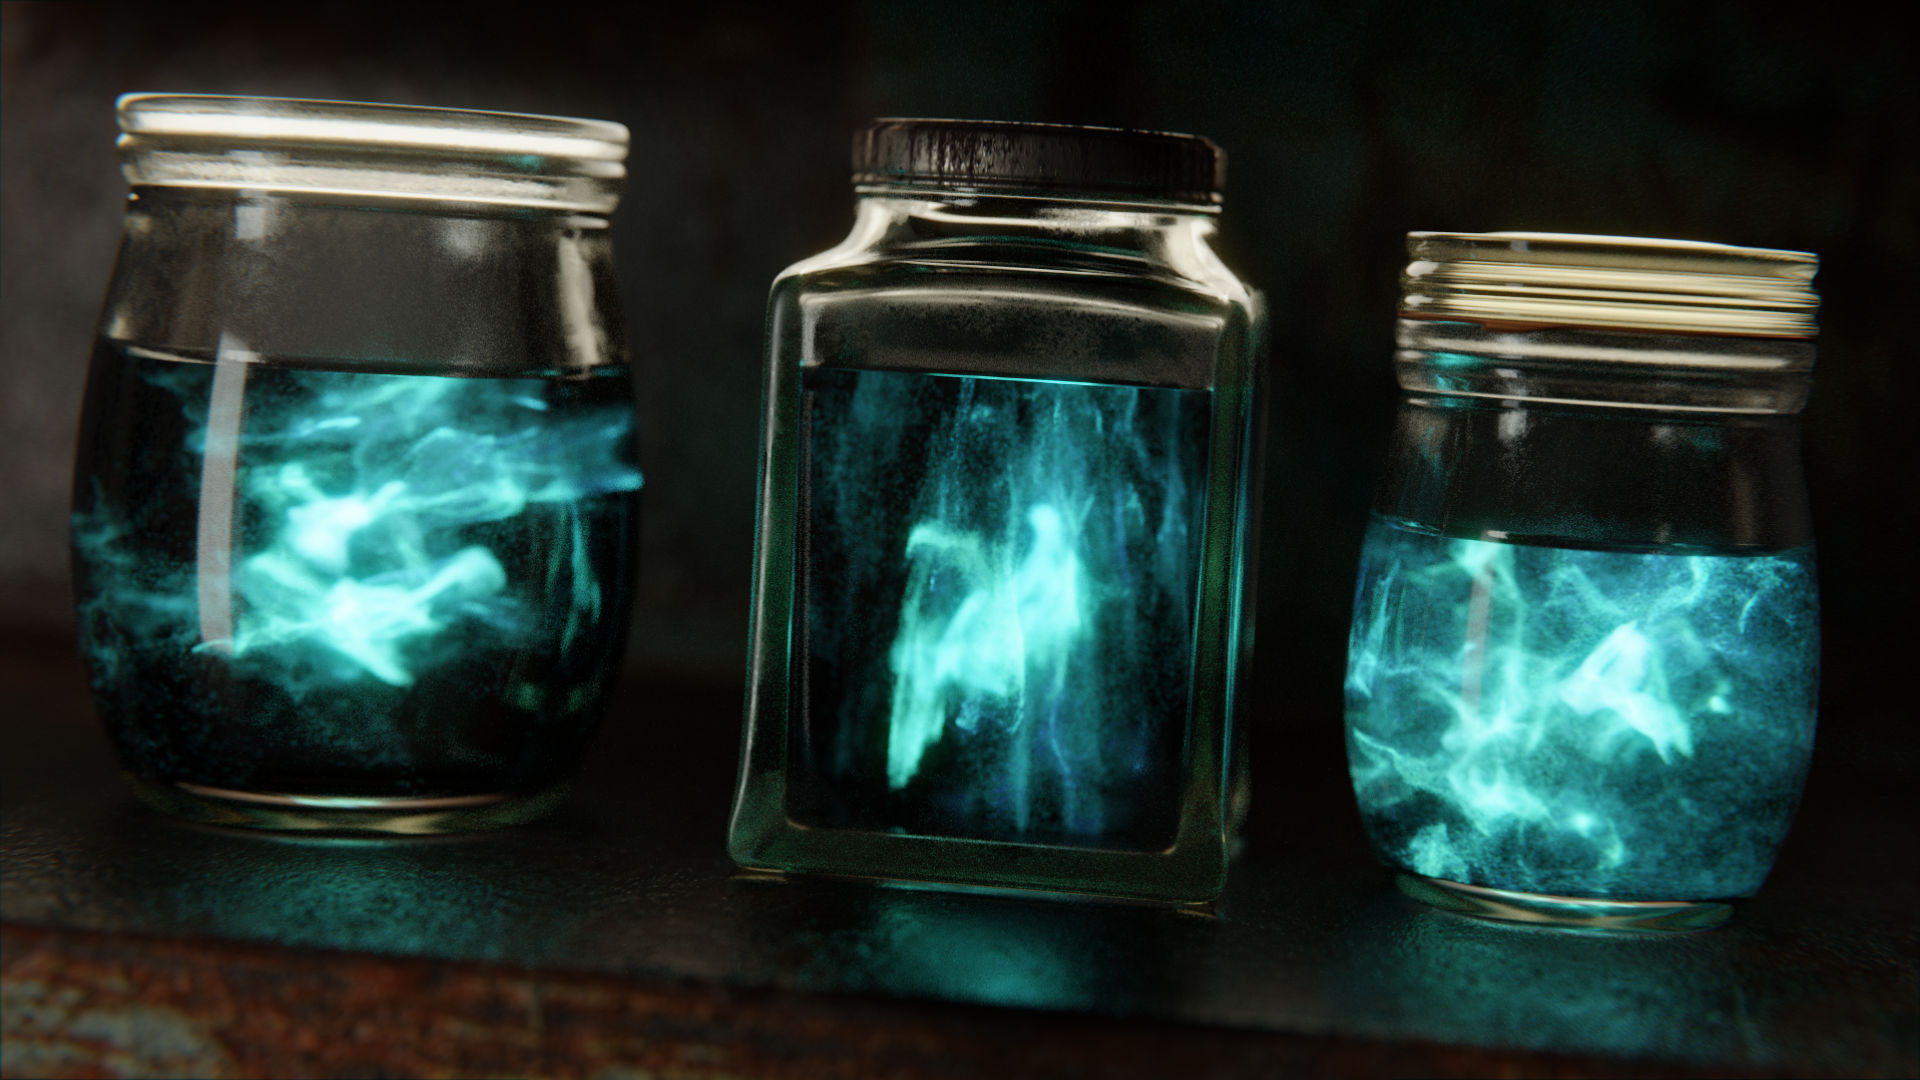 Basic Magical Effect: Ghosts in Jars.